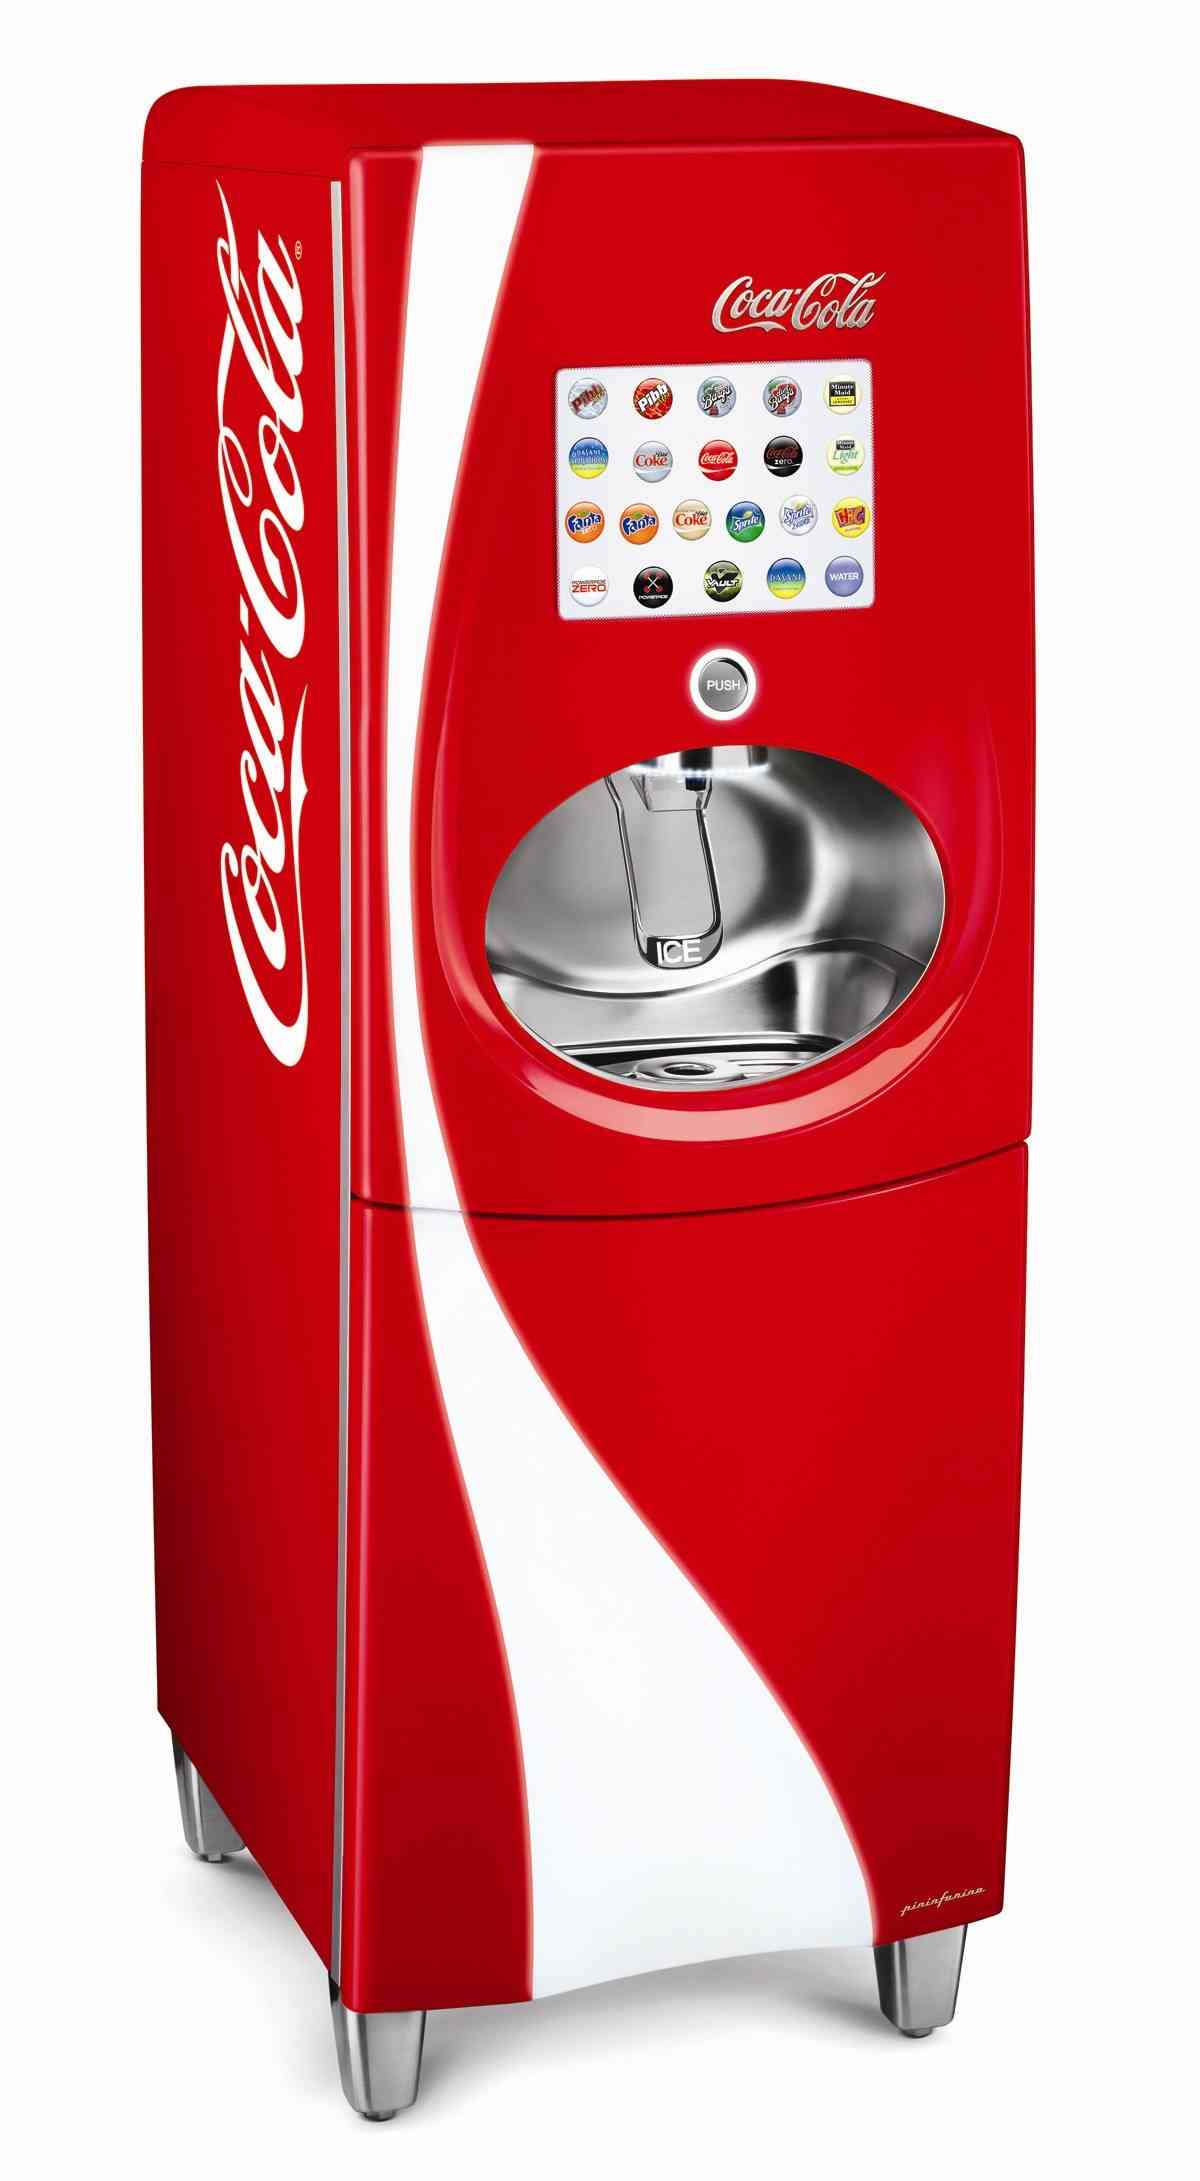 What’s your Coke Freestyle opportunity?